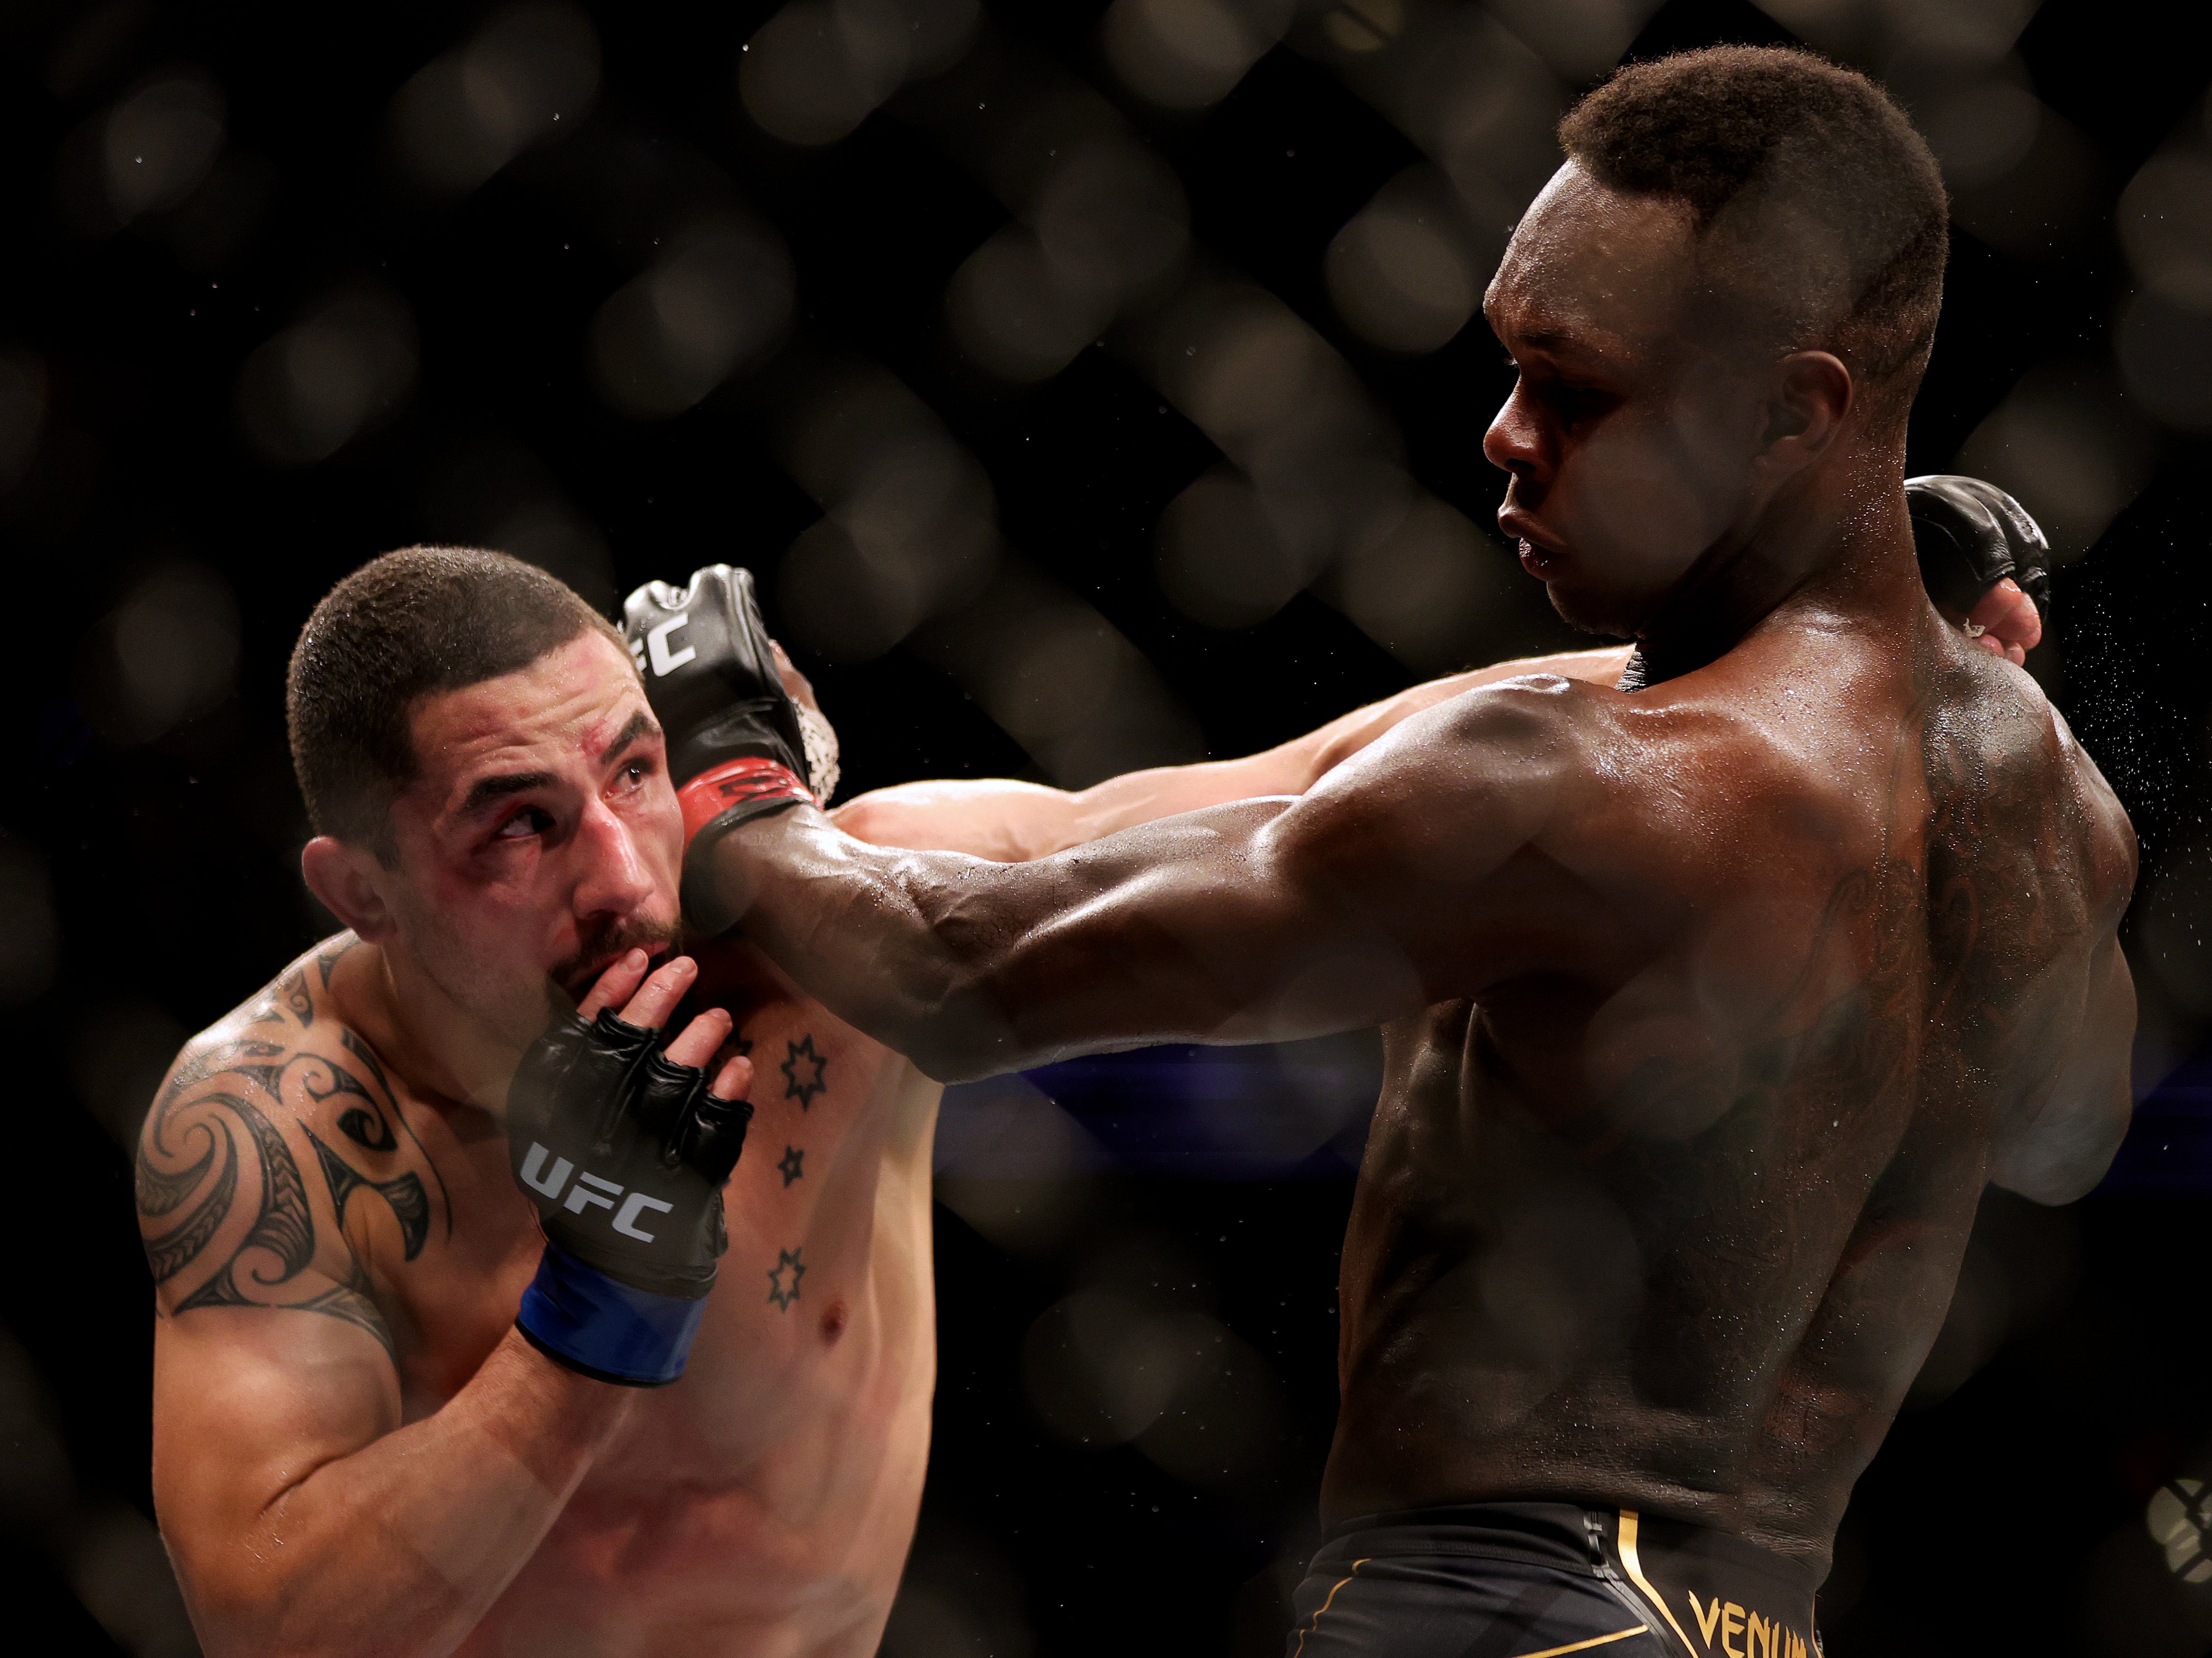 Israel Adesanya (right) again beat Robert Whittaker, this time on points